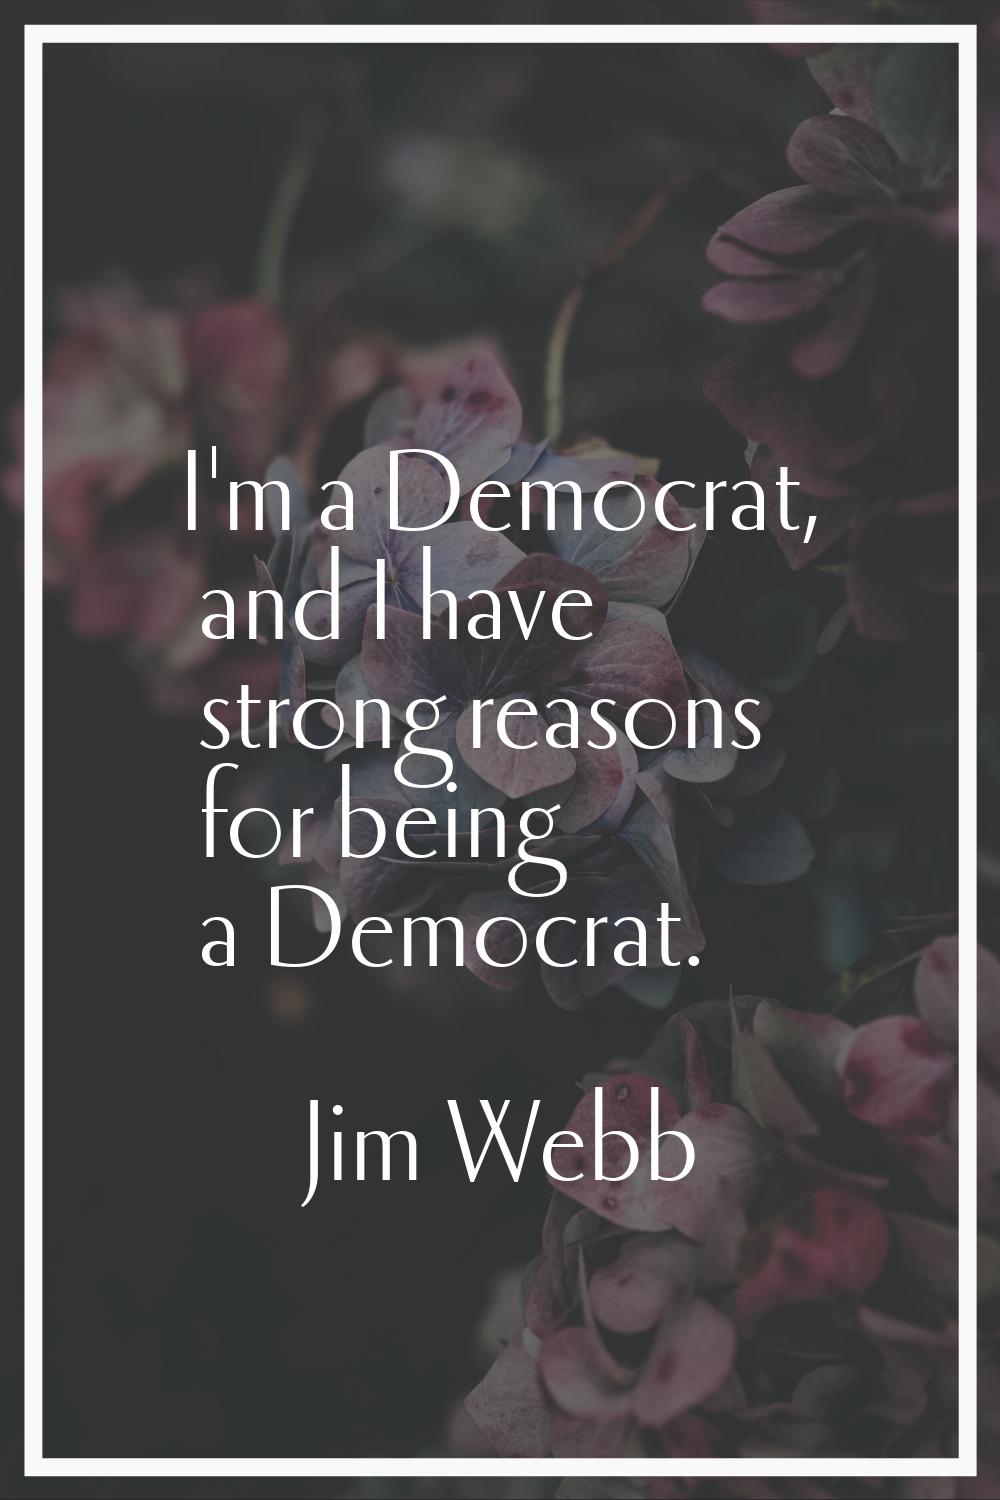 I'm a Democrat, and I have strong reasons for being a Democrat.